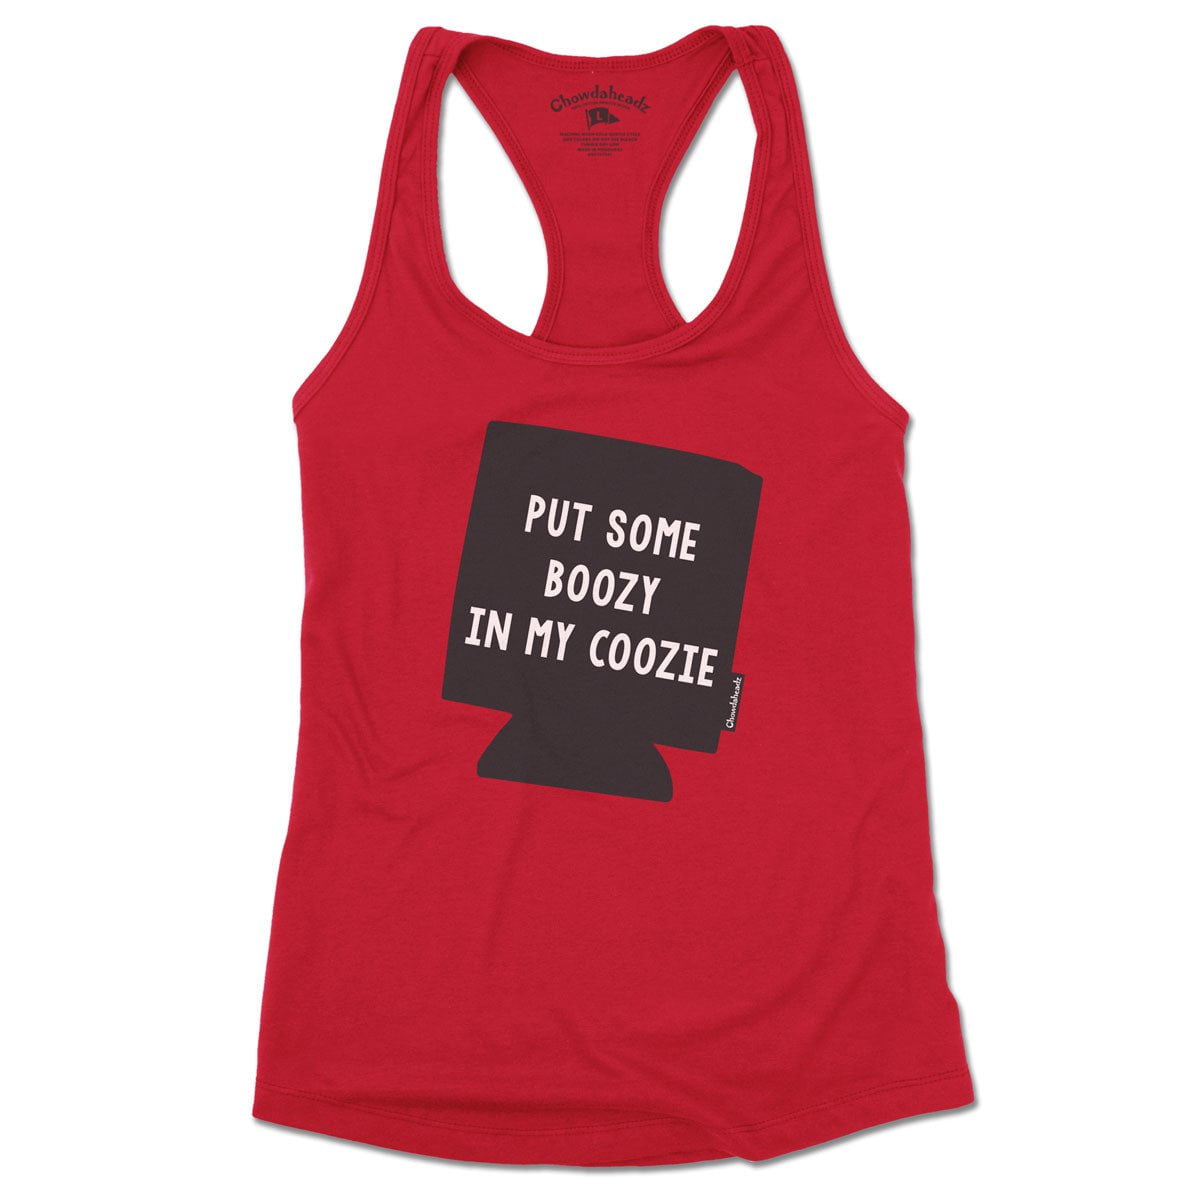 Put Some Boozy In My Coozie  Women's Tank Top (6 Colors) - Chowdaheadz